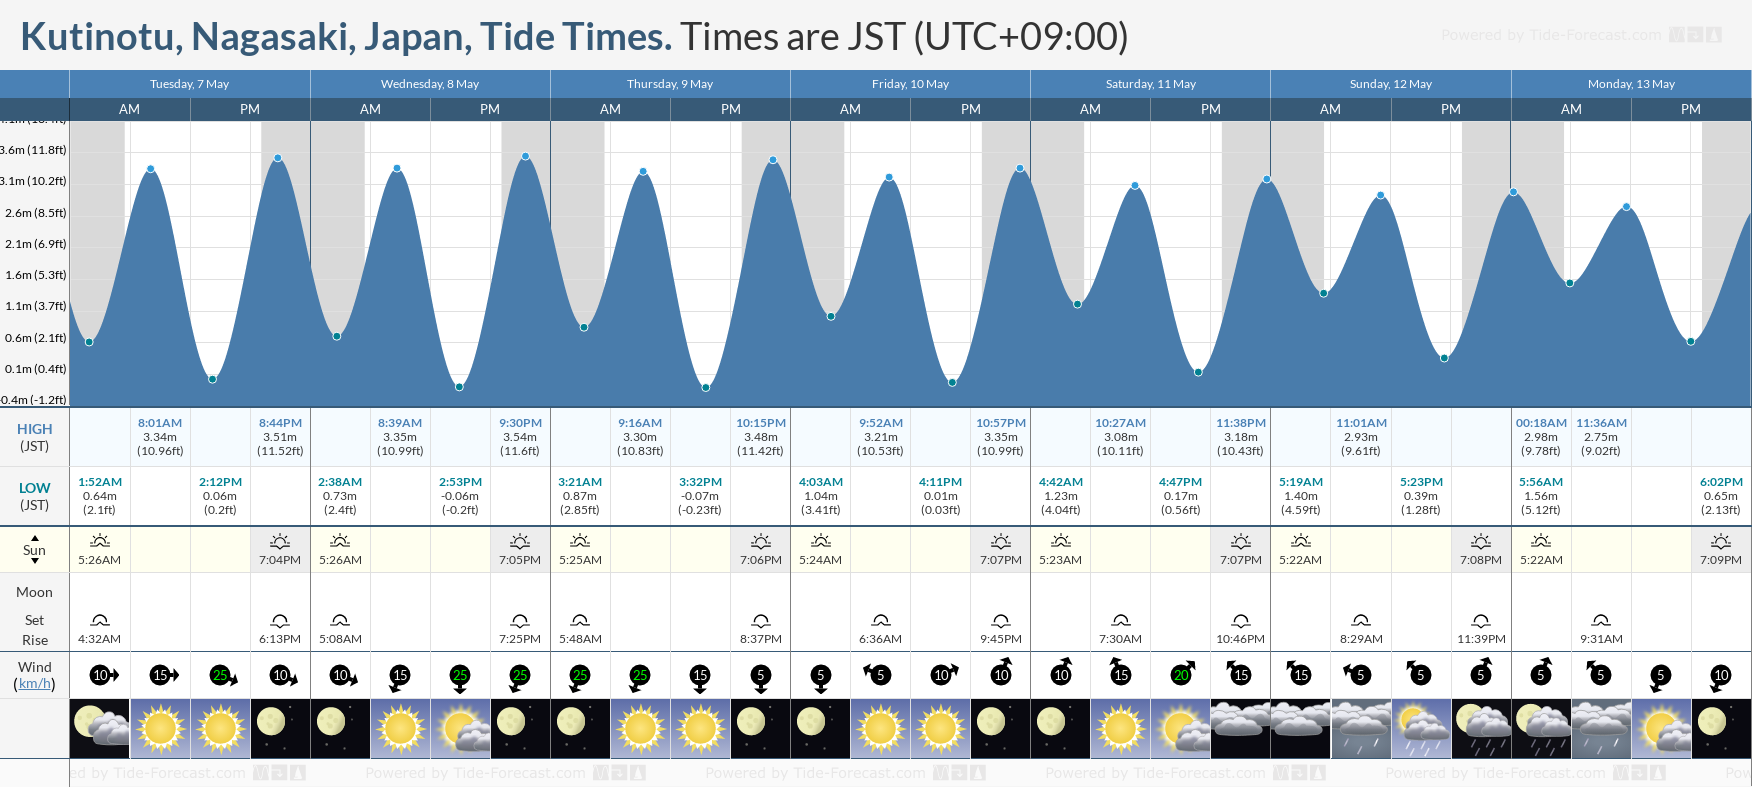 Kutinotu, Nagasaki, Japan Tide Chart including high and low tide times for the next 7 days